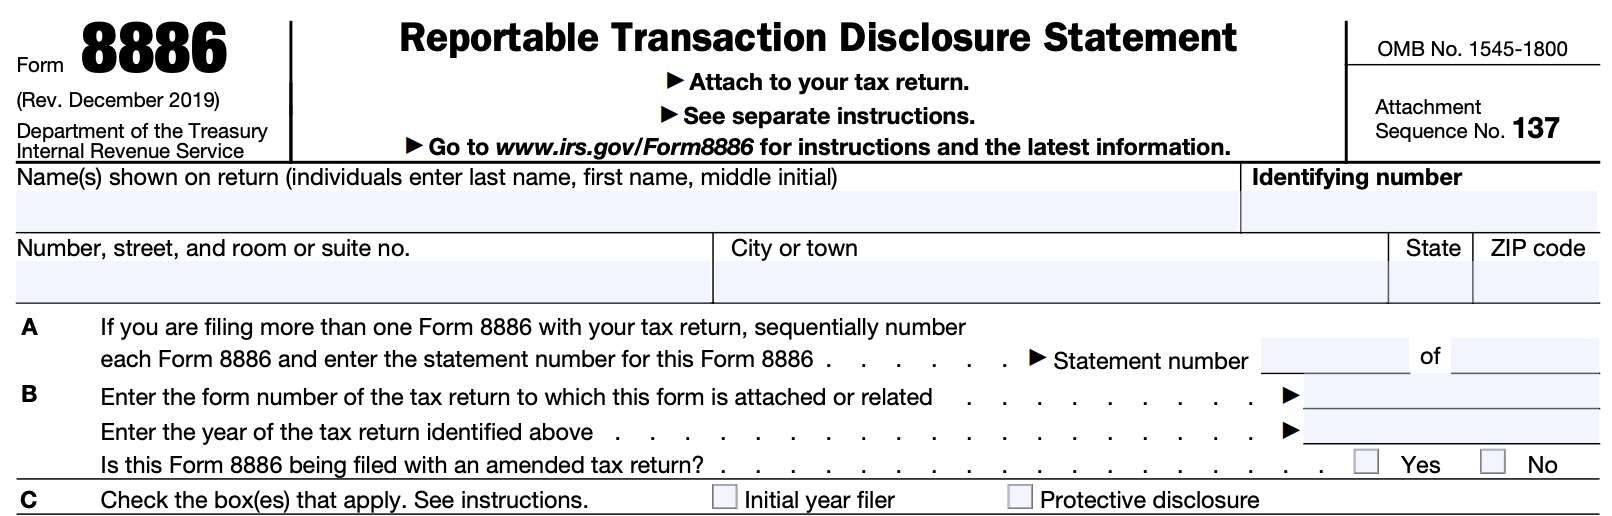 irs form 8886, reportable transaction disclosure statement